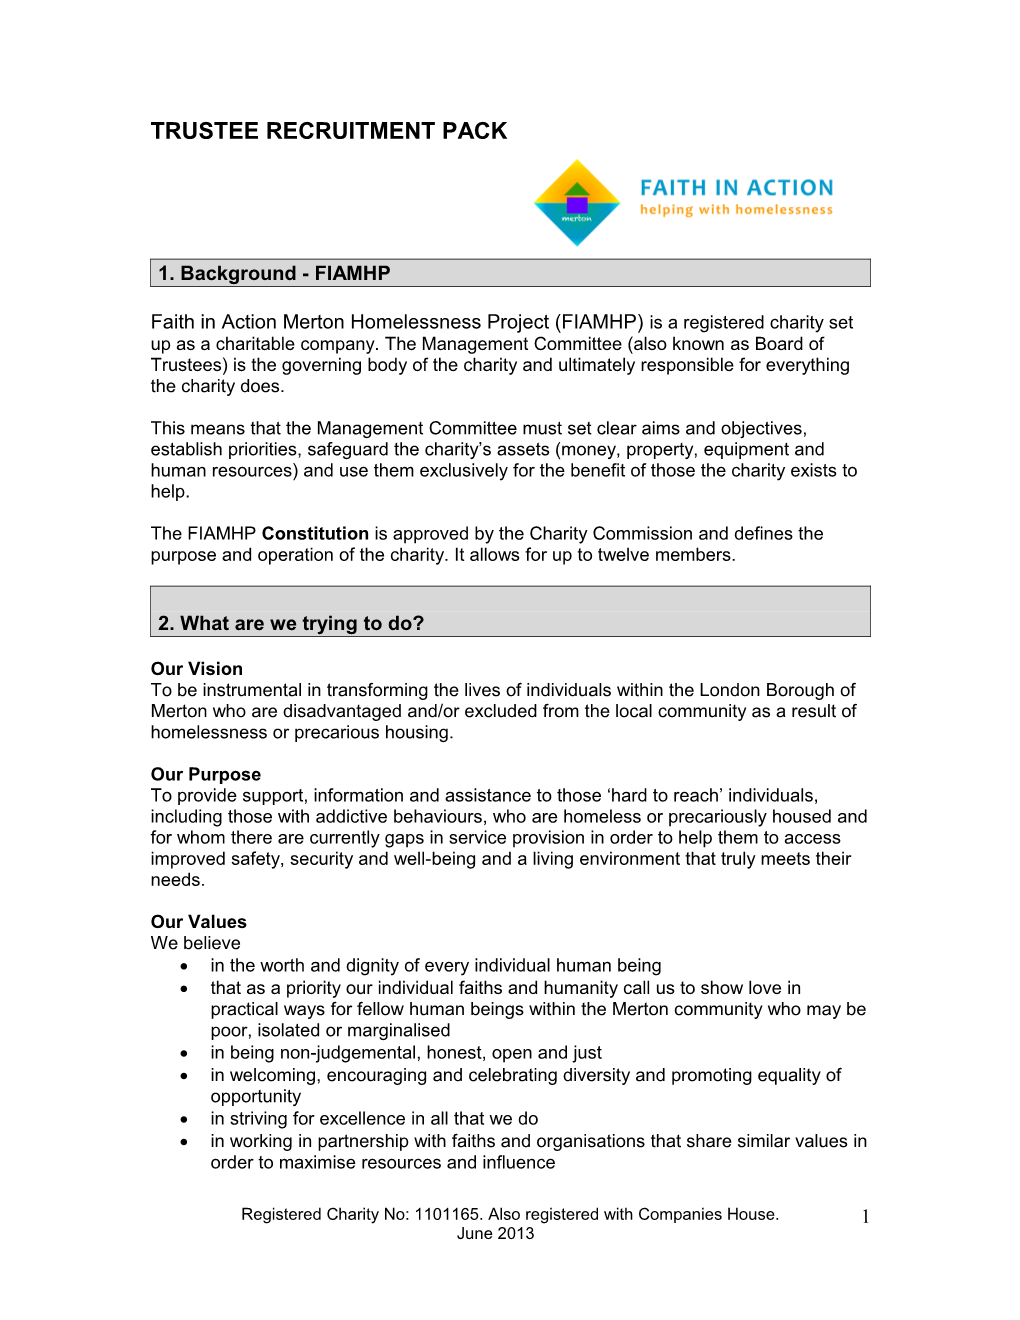 Faith in Action Merton Homelessness Project (FIAMHP)